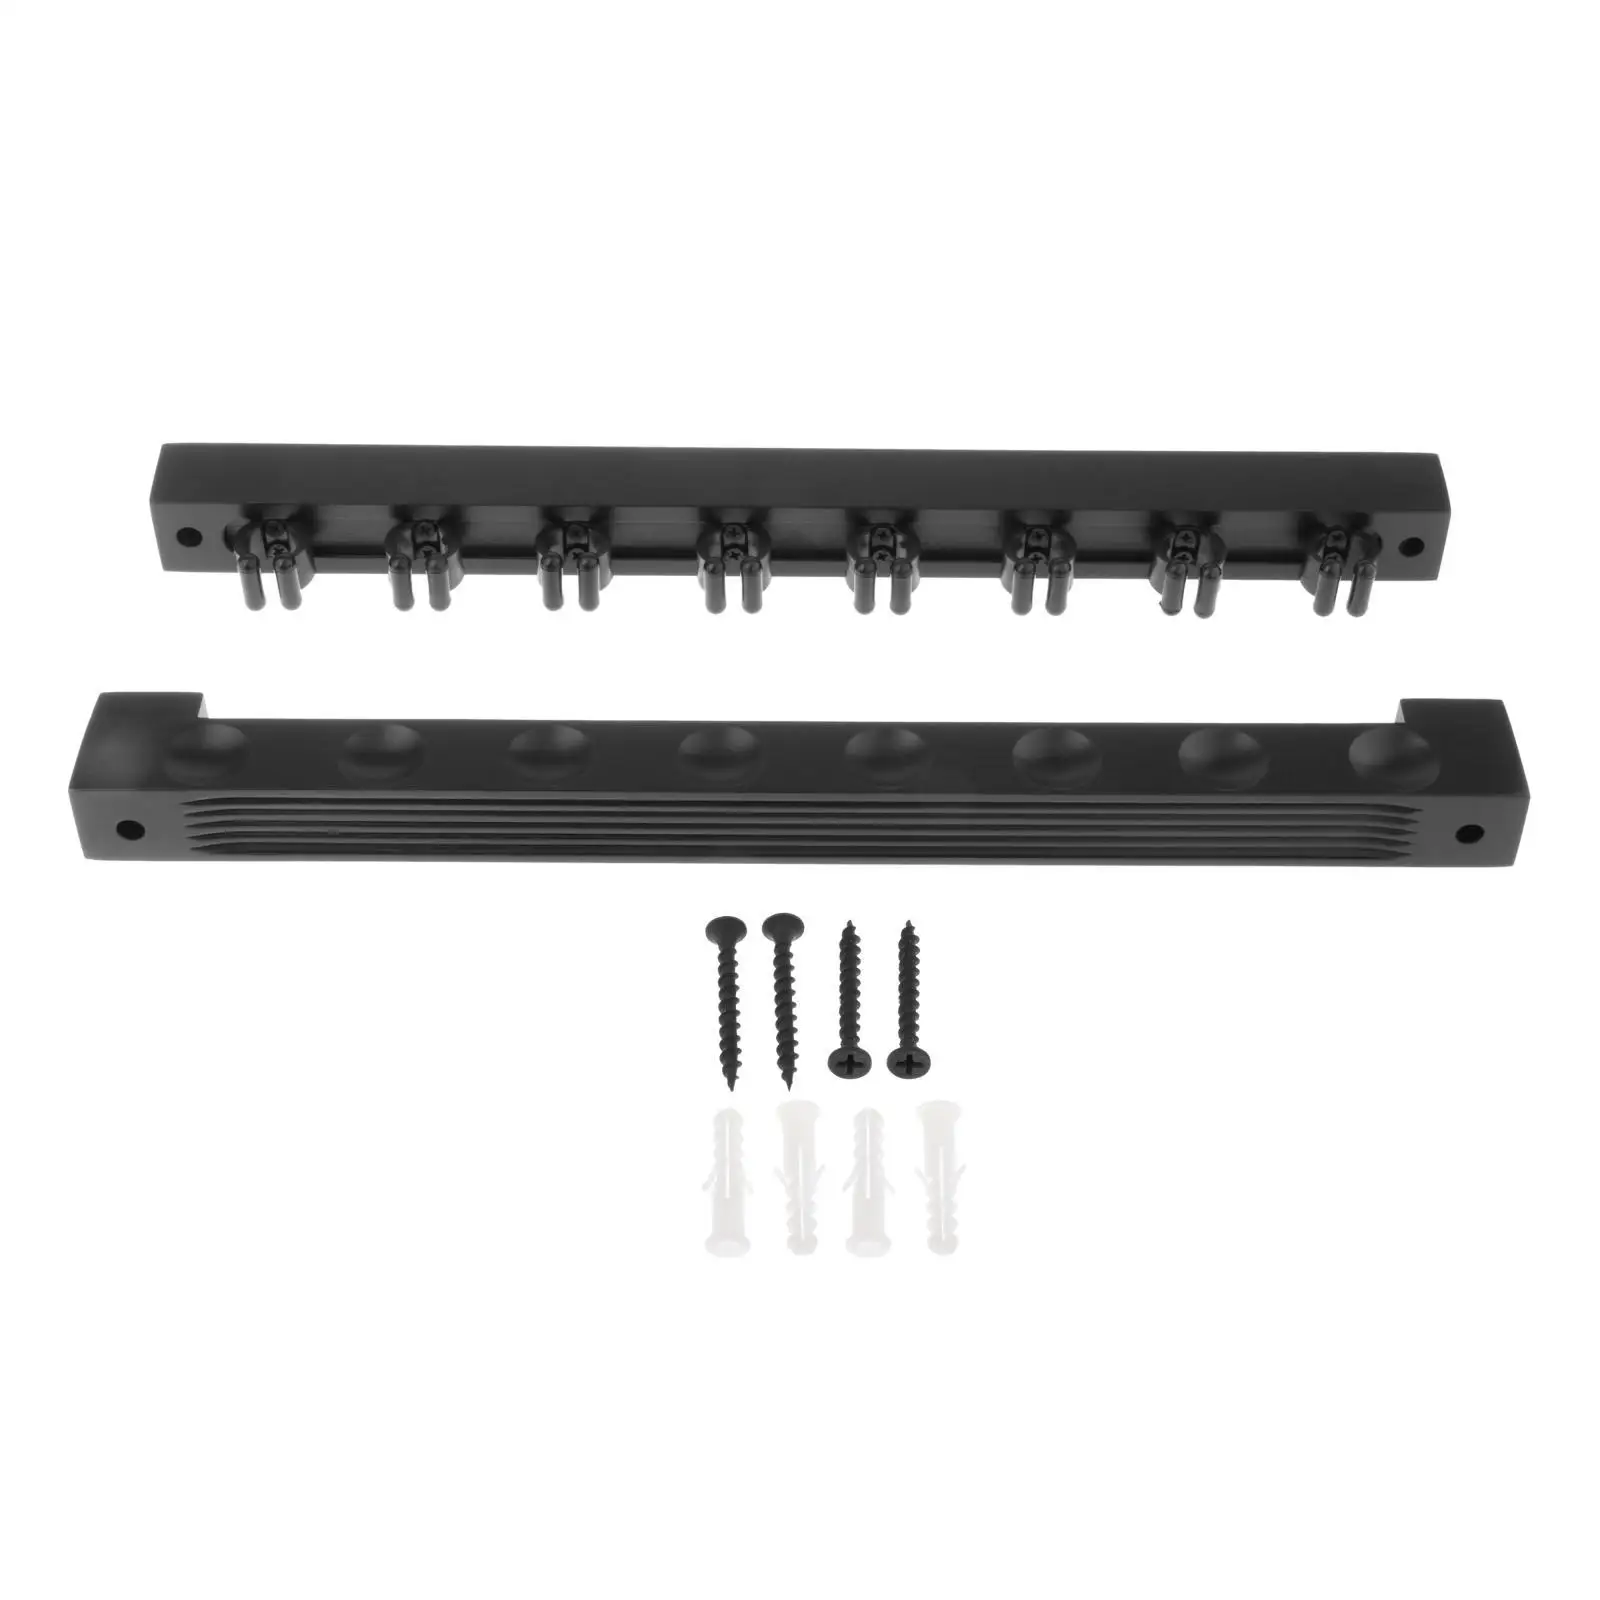 Wooden Pool Cue Holder Billiard Cue Wall Racks with 8 Cue Clips Easily Install Exquisite Sturdy Accessory Black for Game Room